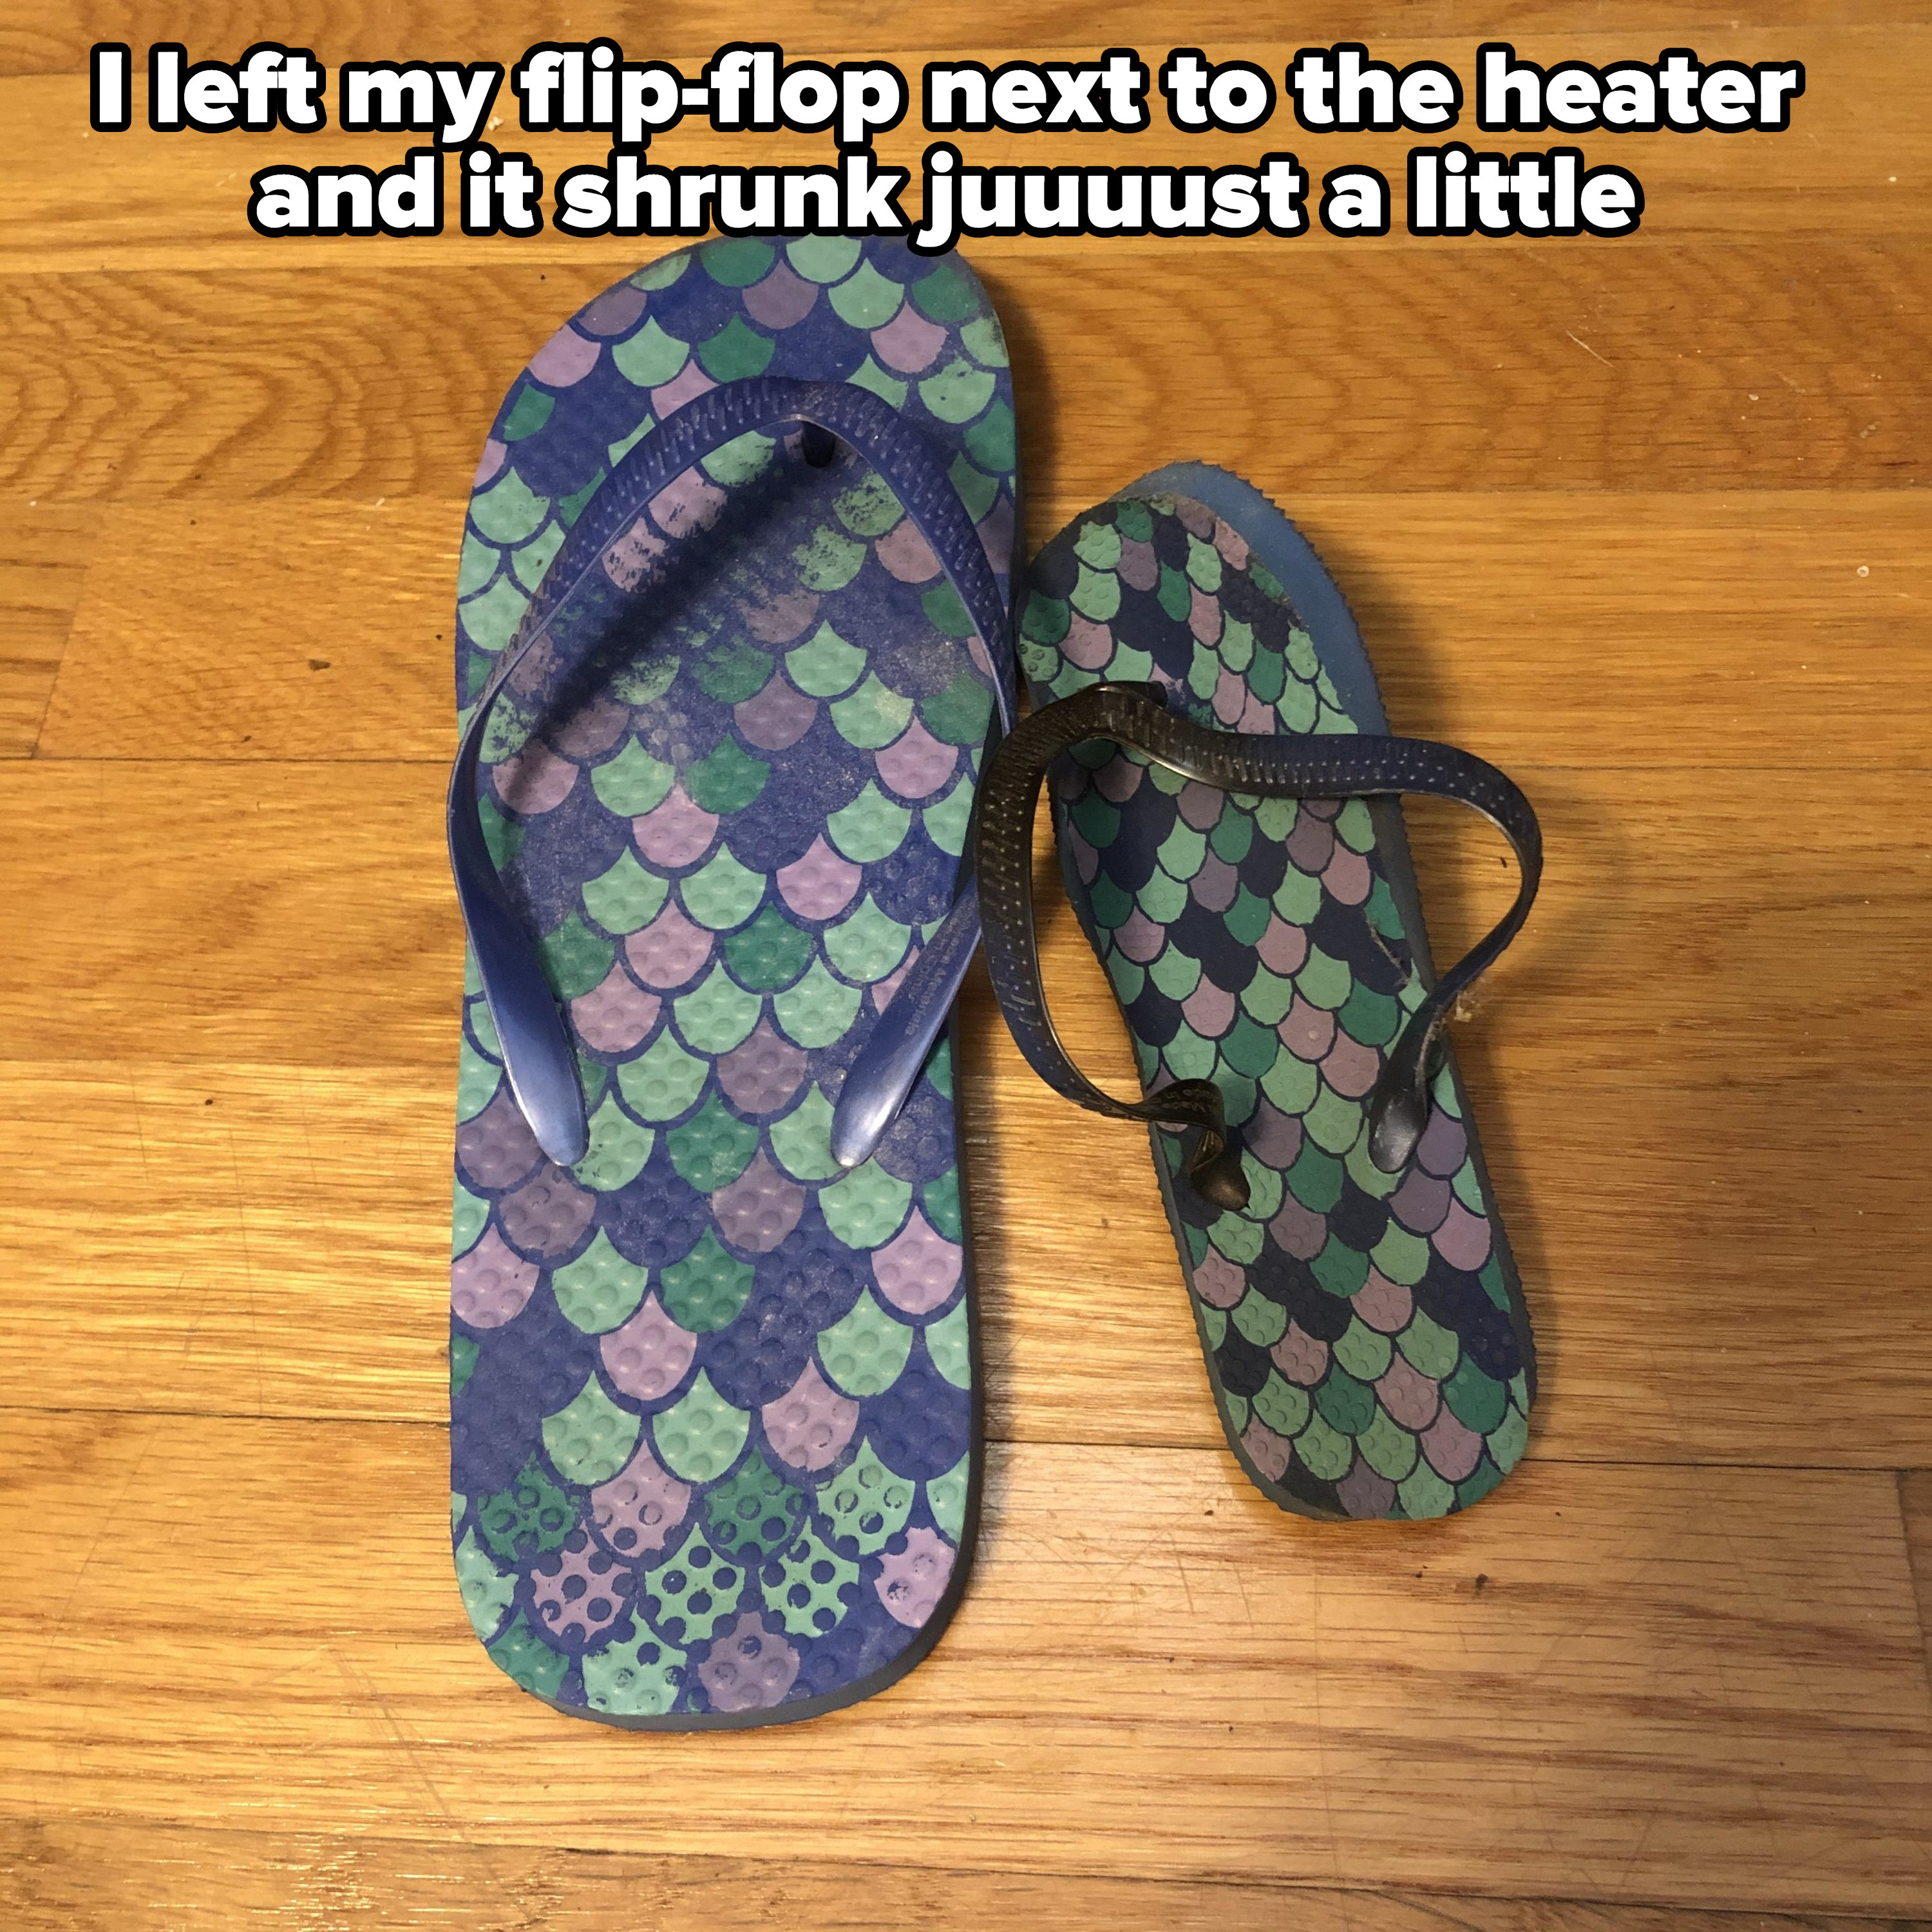 Flip-flop sandal that shrank while it was next to a heater alongside the intact sandal, which is about a third bigger